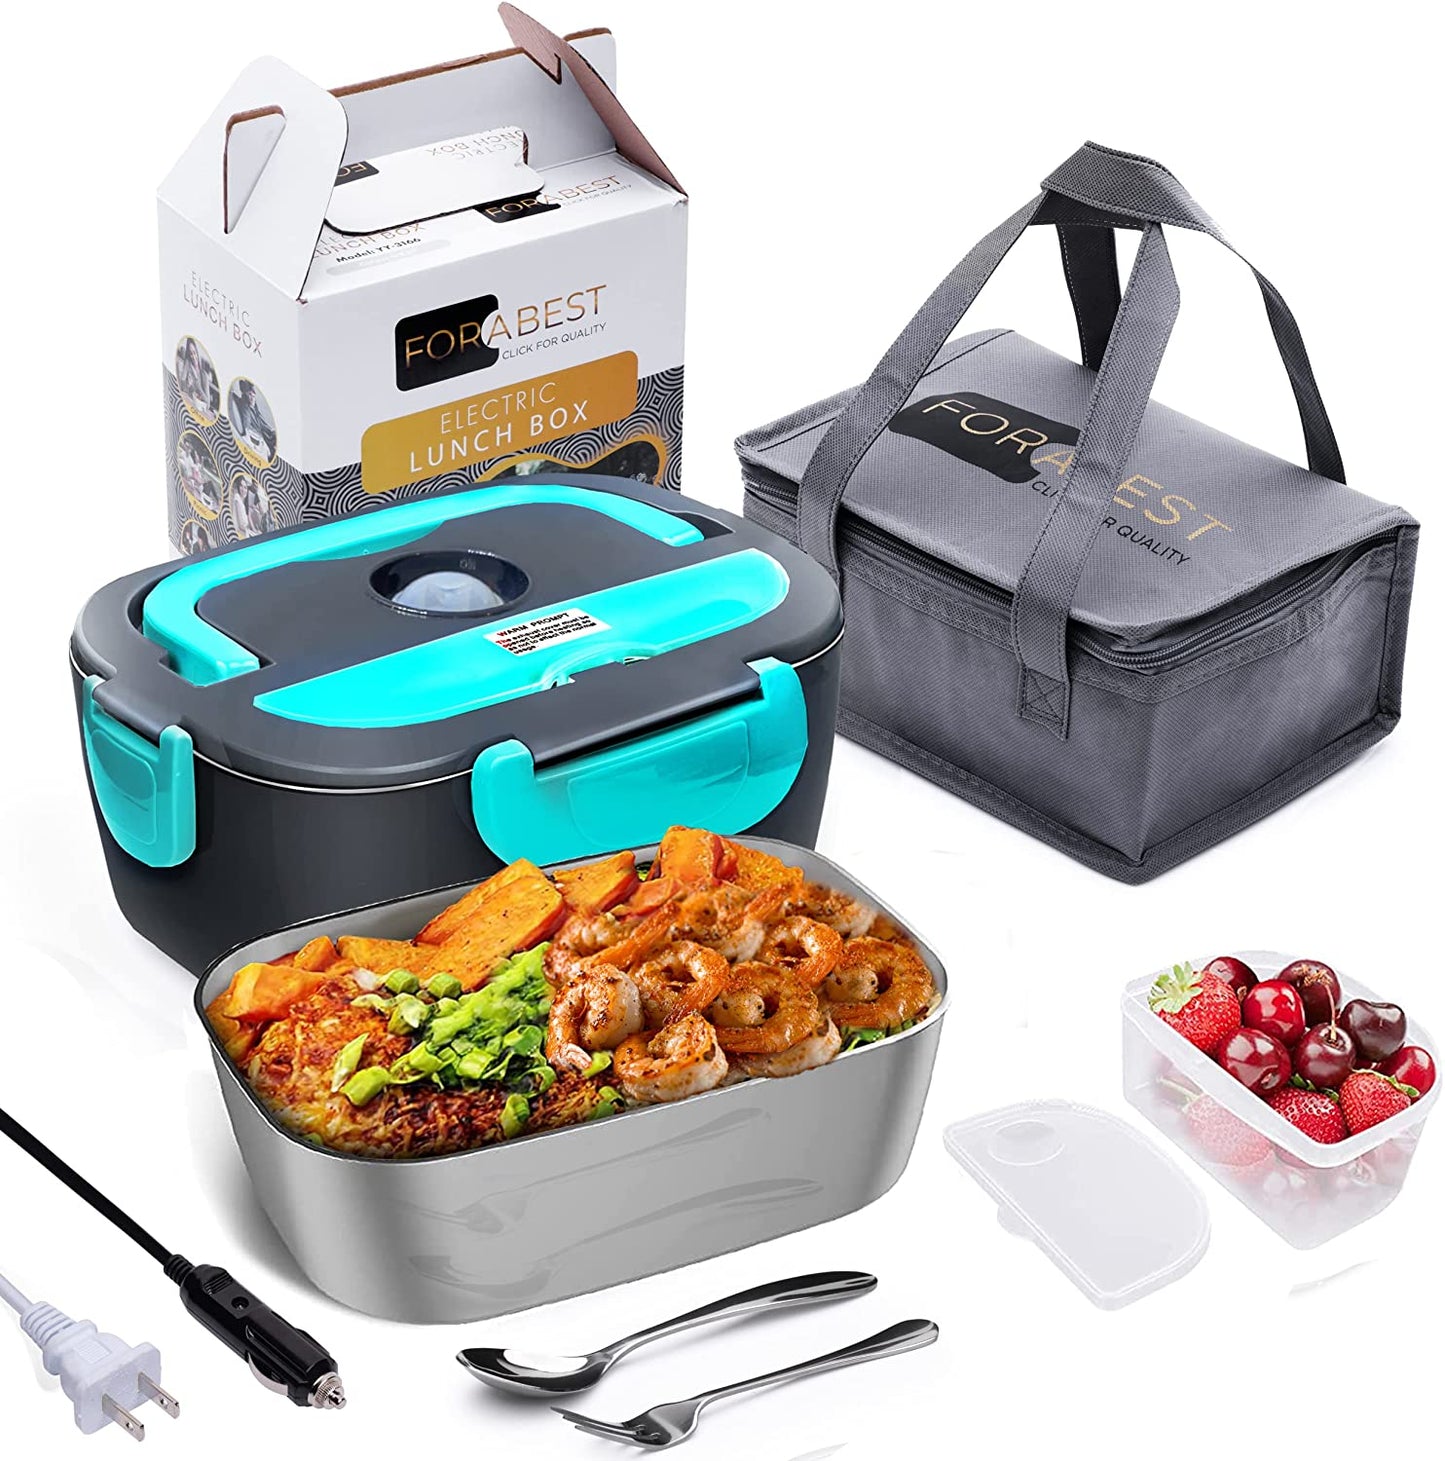 FORABEST Electric Lunch Box - Fast 60W Food Heater 3-in-1 Portable Food Warmer Lunch Box for Car & Home – Leak Proof, 2 Compartments, Removable 304